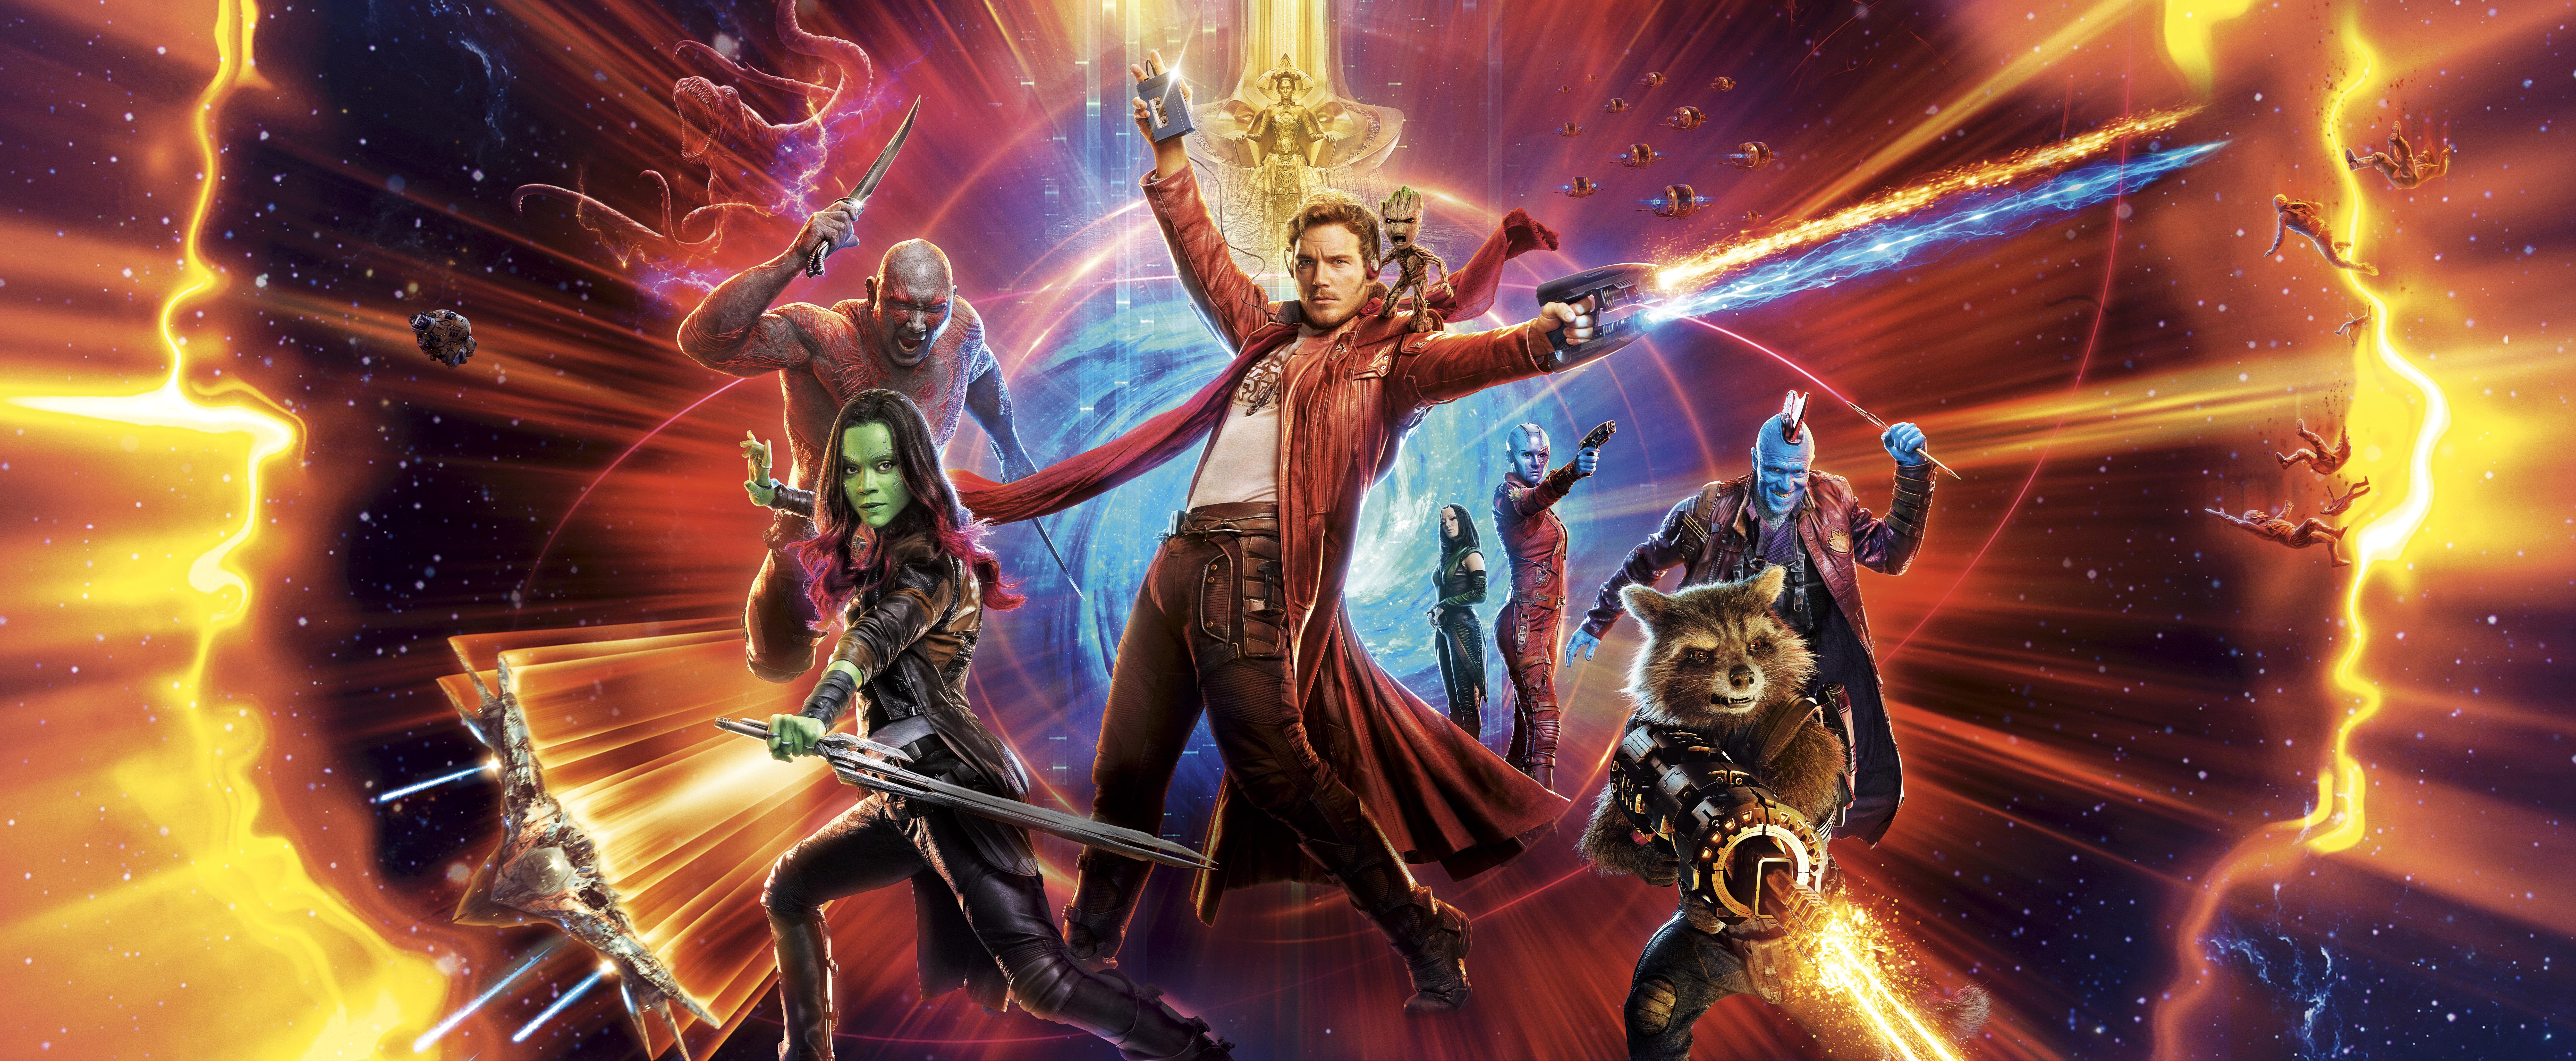 Download Movie Guardians of the Galaxy Vol. 2 Peter Quill Rocket